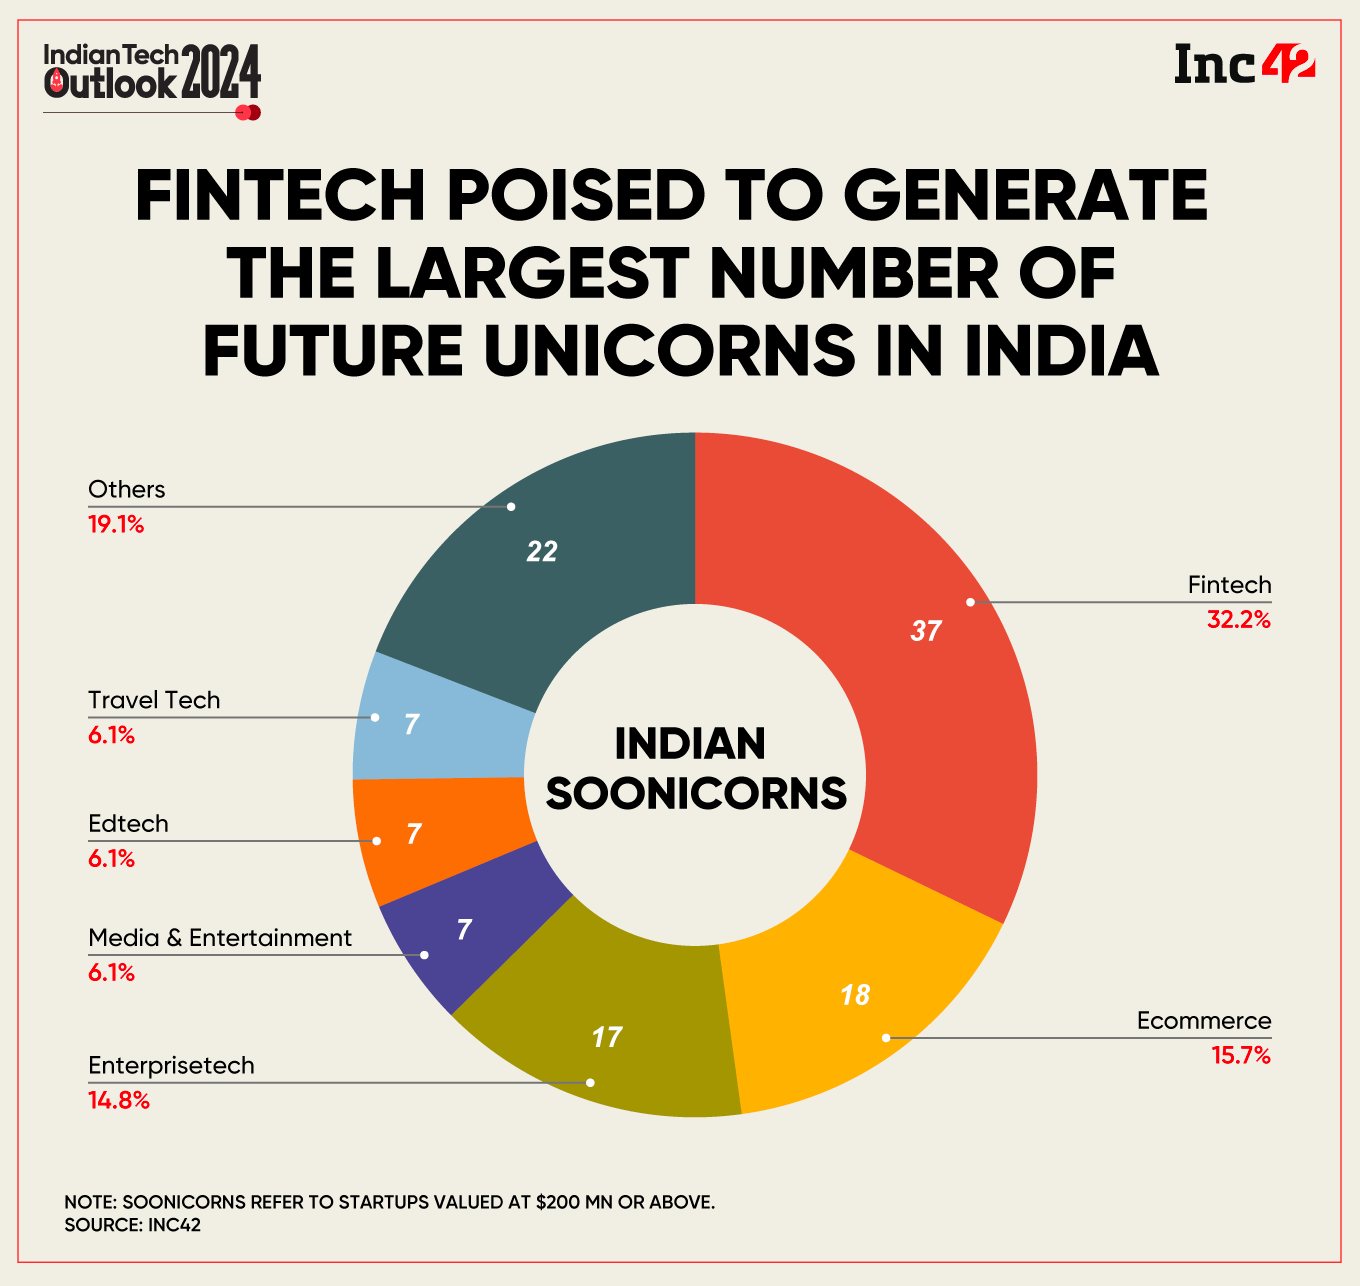 What Lies Ahead Of Indian Unicorns In 2024?